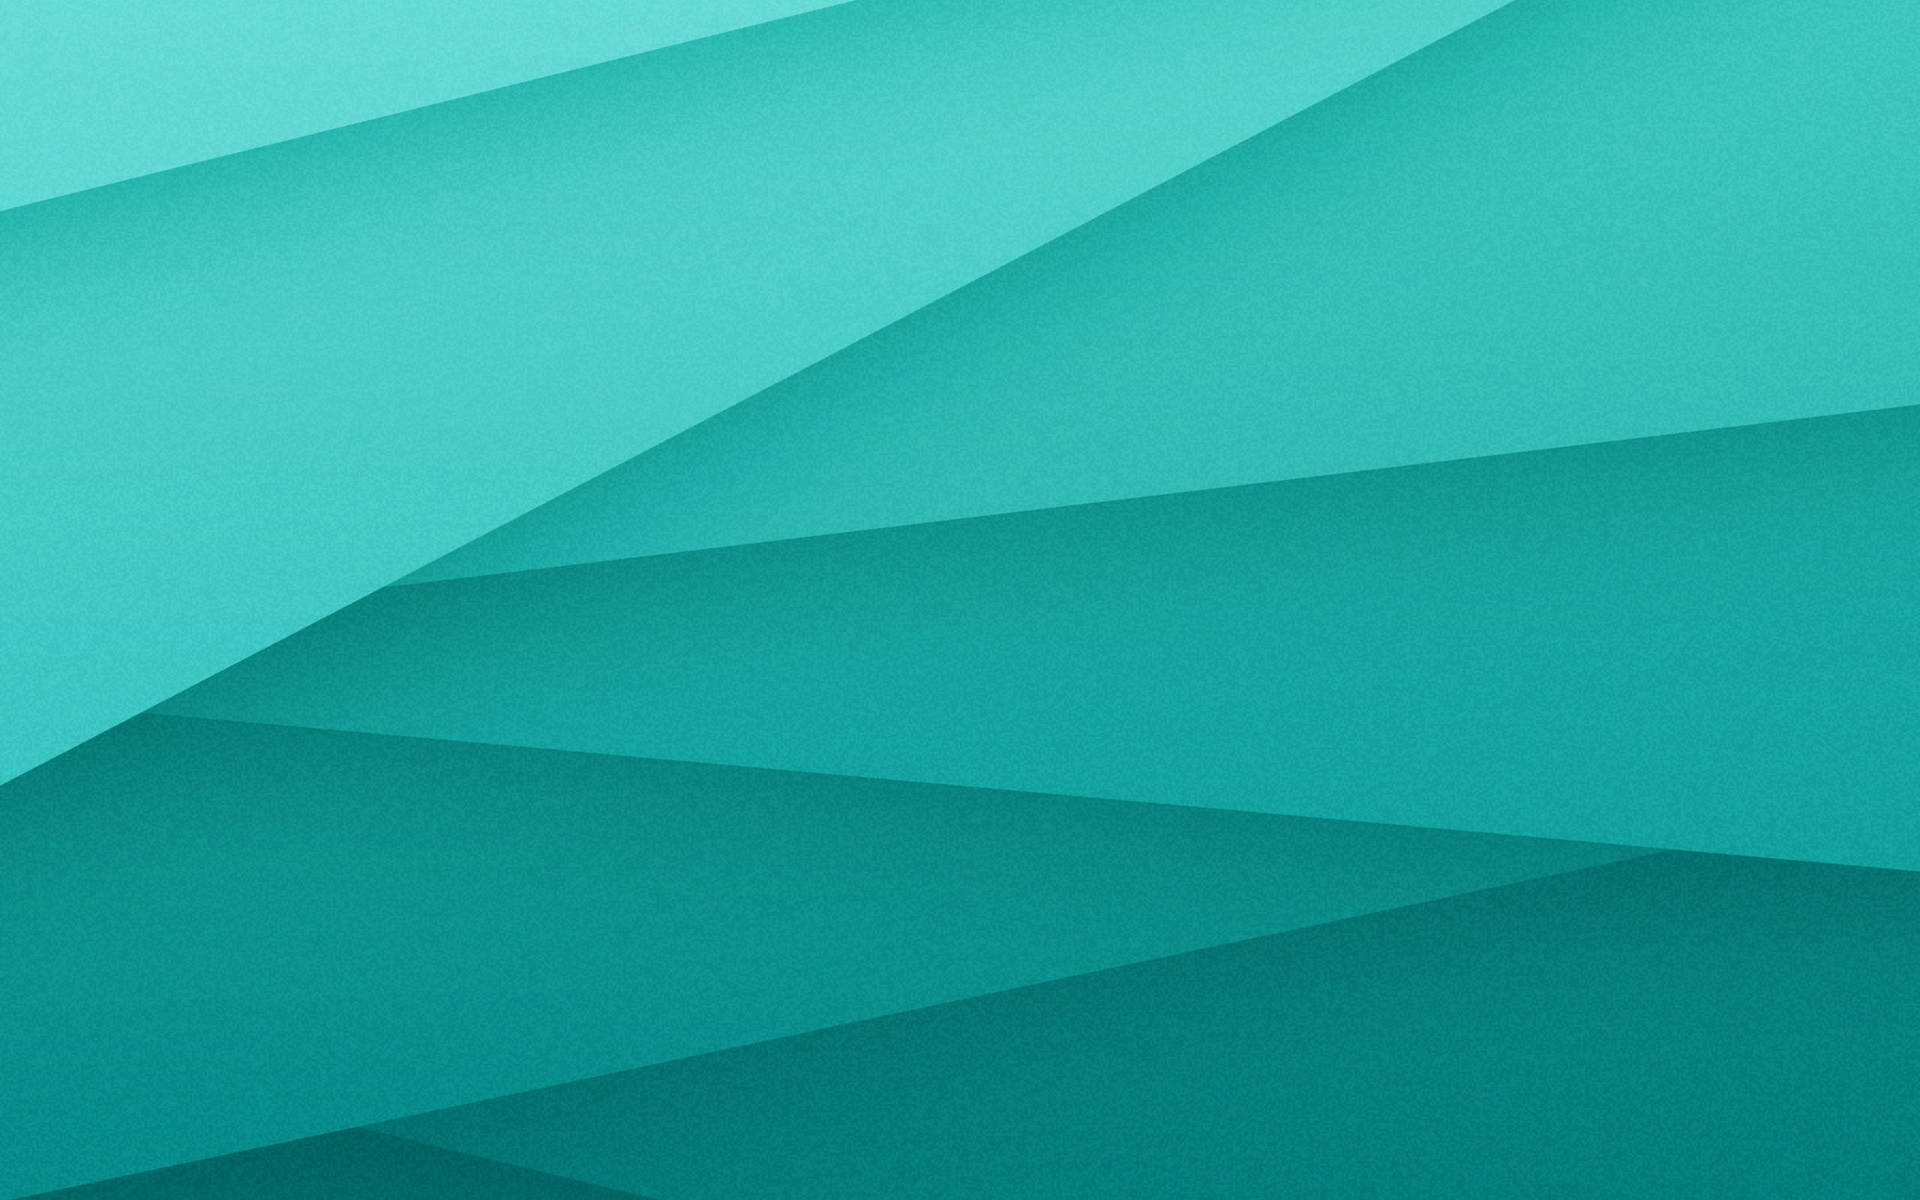 Abstract Turquoise Shapes Material Design Wallpaper